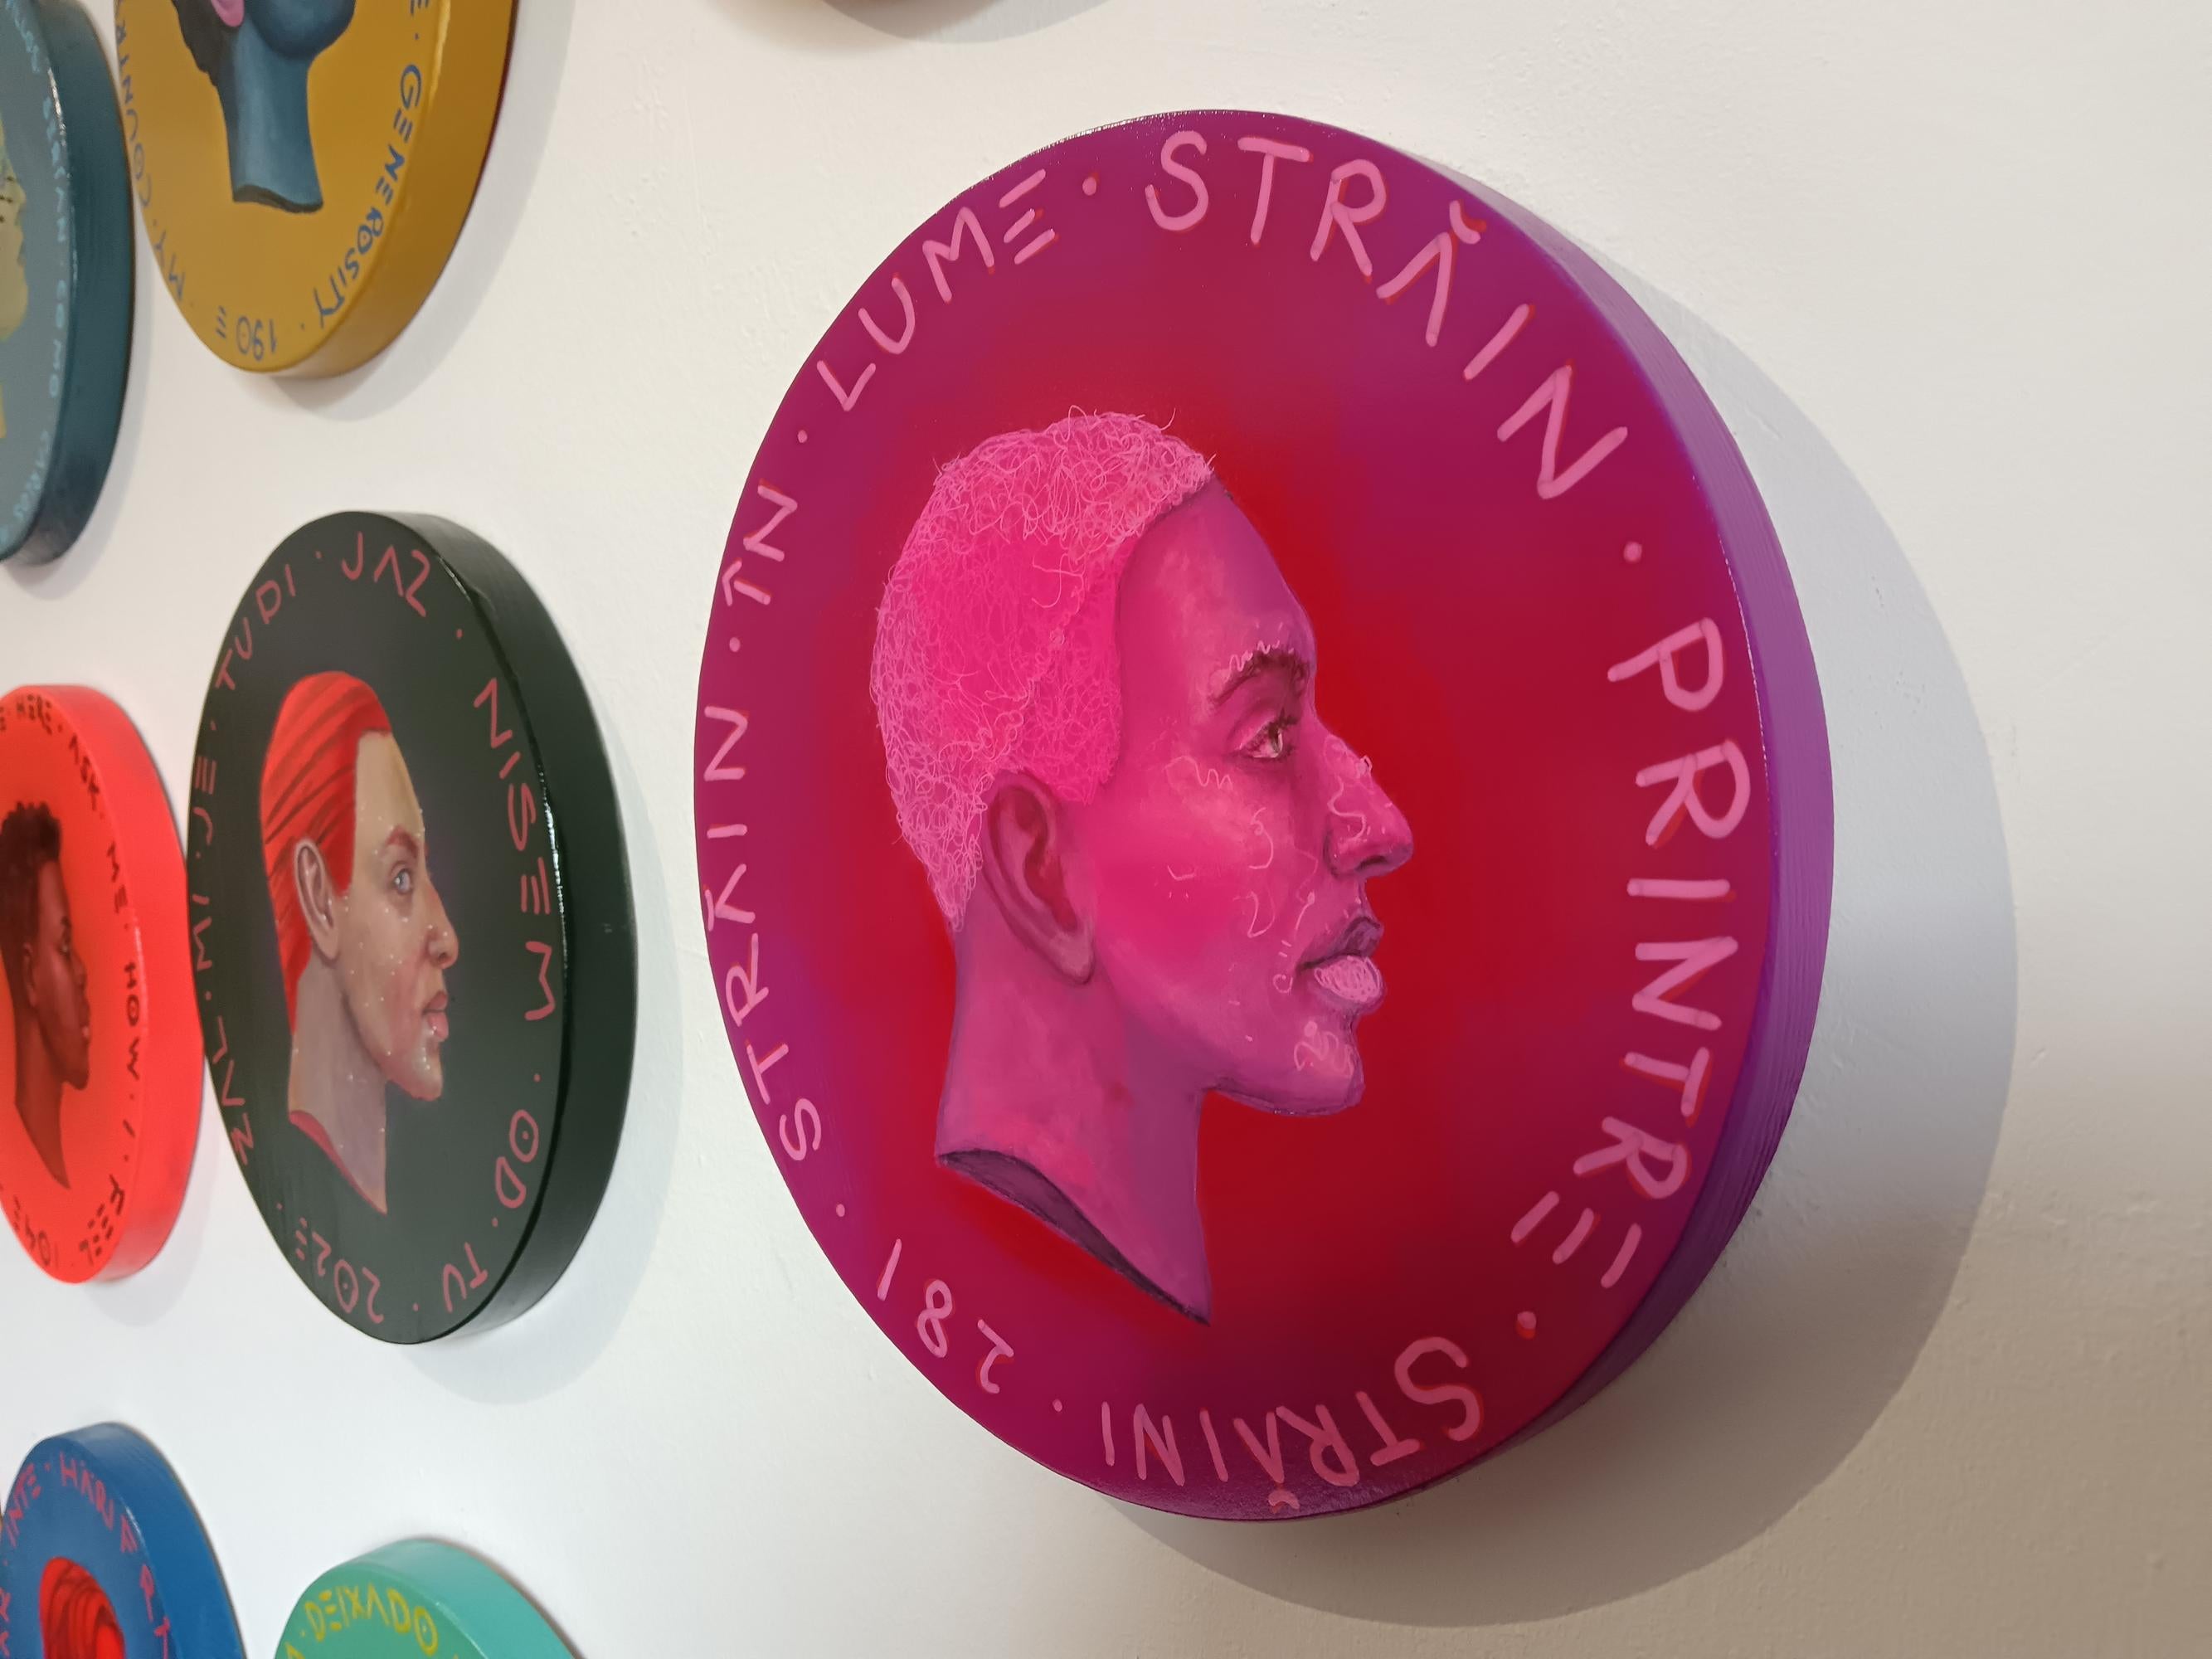 This sculptural painting, part of Natasha Lelenco's Currency Exchange series, consists of a profile portrait on a wooden tondo with intense fluorescent pink colors of a character framed by the Romanian phrase 